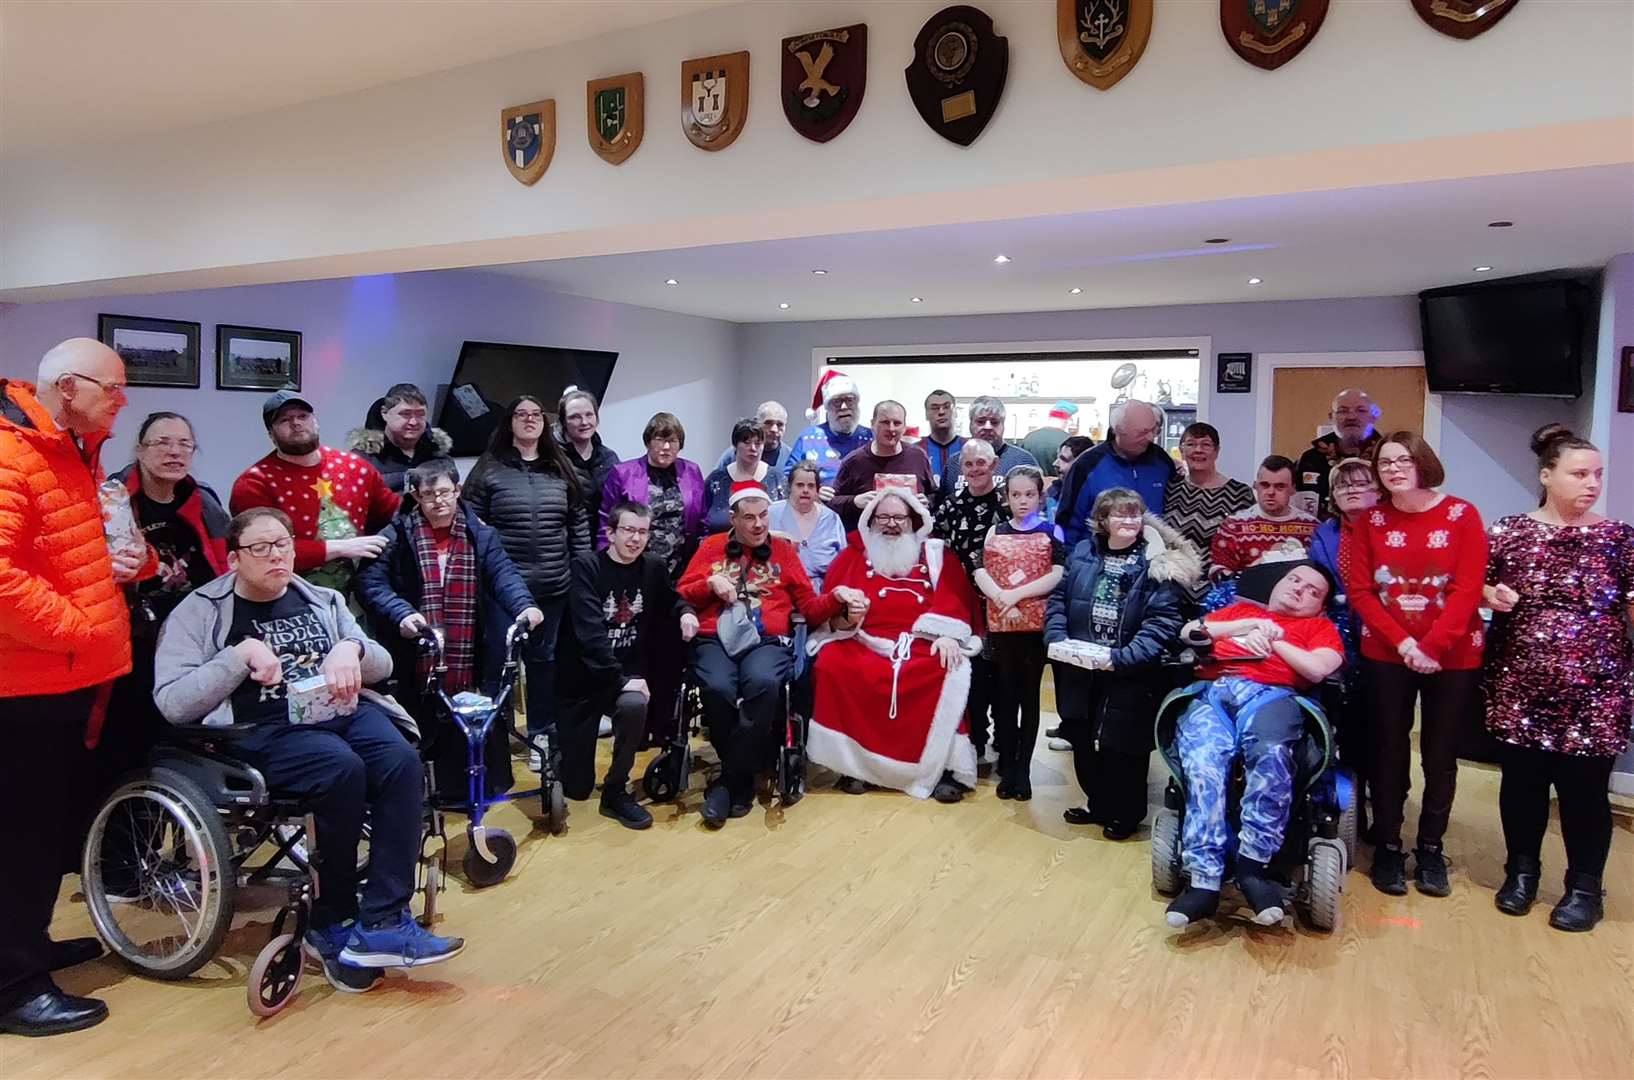 Monday Club members gather around Santa at their Christmas party in the Caithness rugby club pavilion. Picture: Fiona Harrington